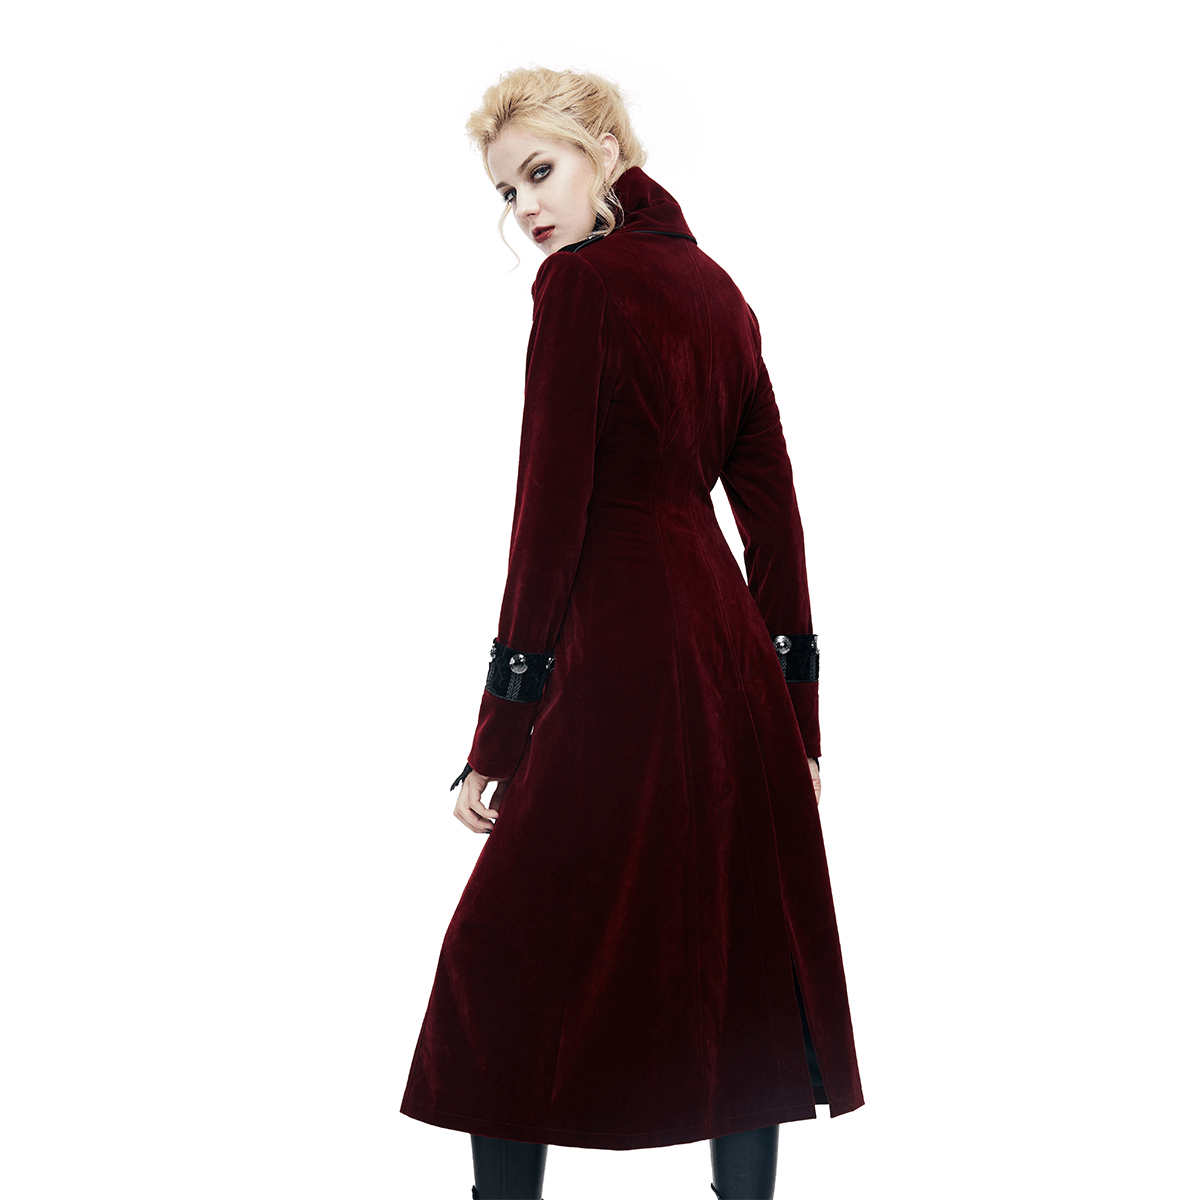 Women Embossed Long Red Coat In Gothic Style / High Collar Alternative Fashion Outerwear - HARD'N'HEAVY